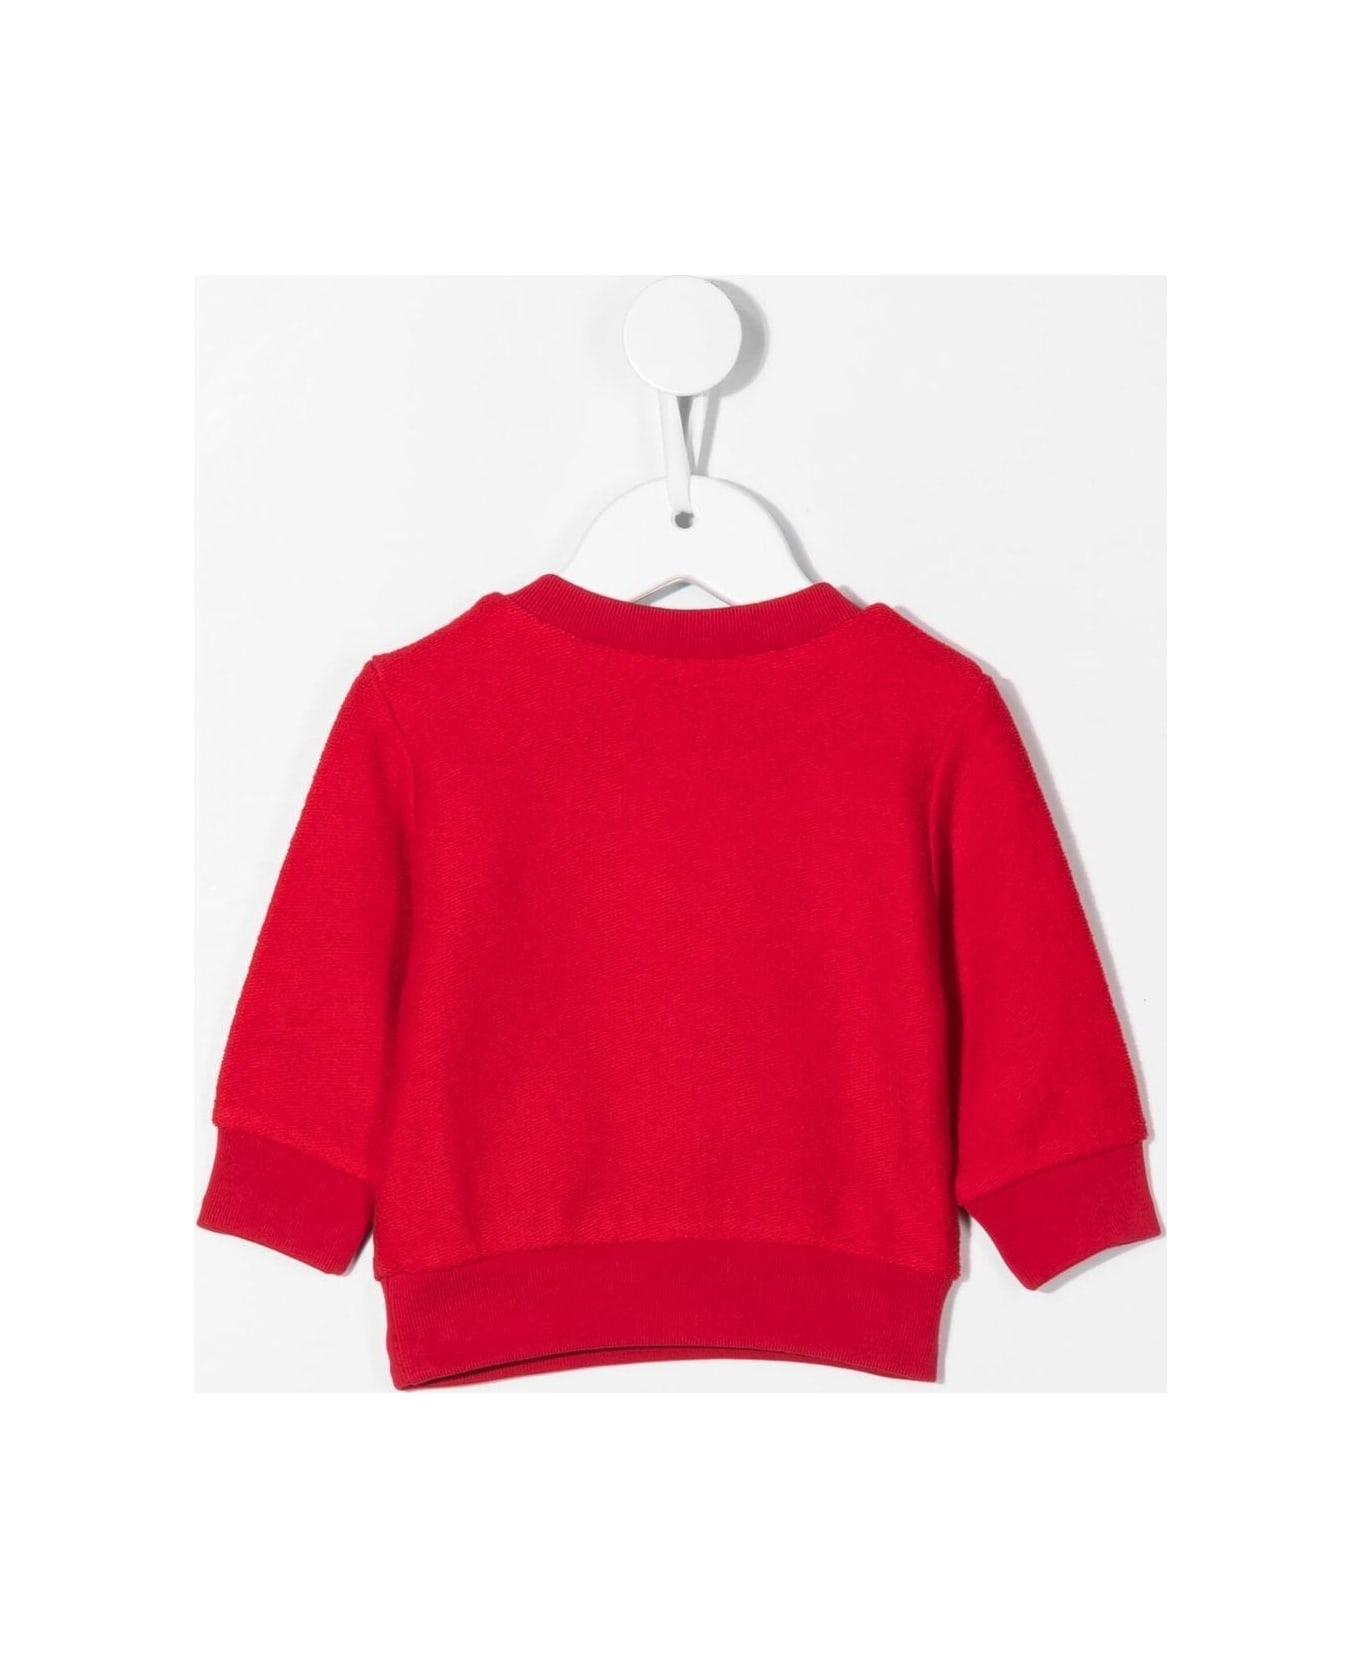 Dsquared2 Baby Red Sweatshirt With White Reflected Logo - Red